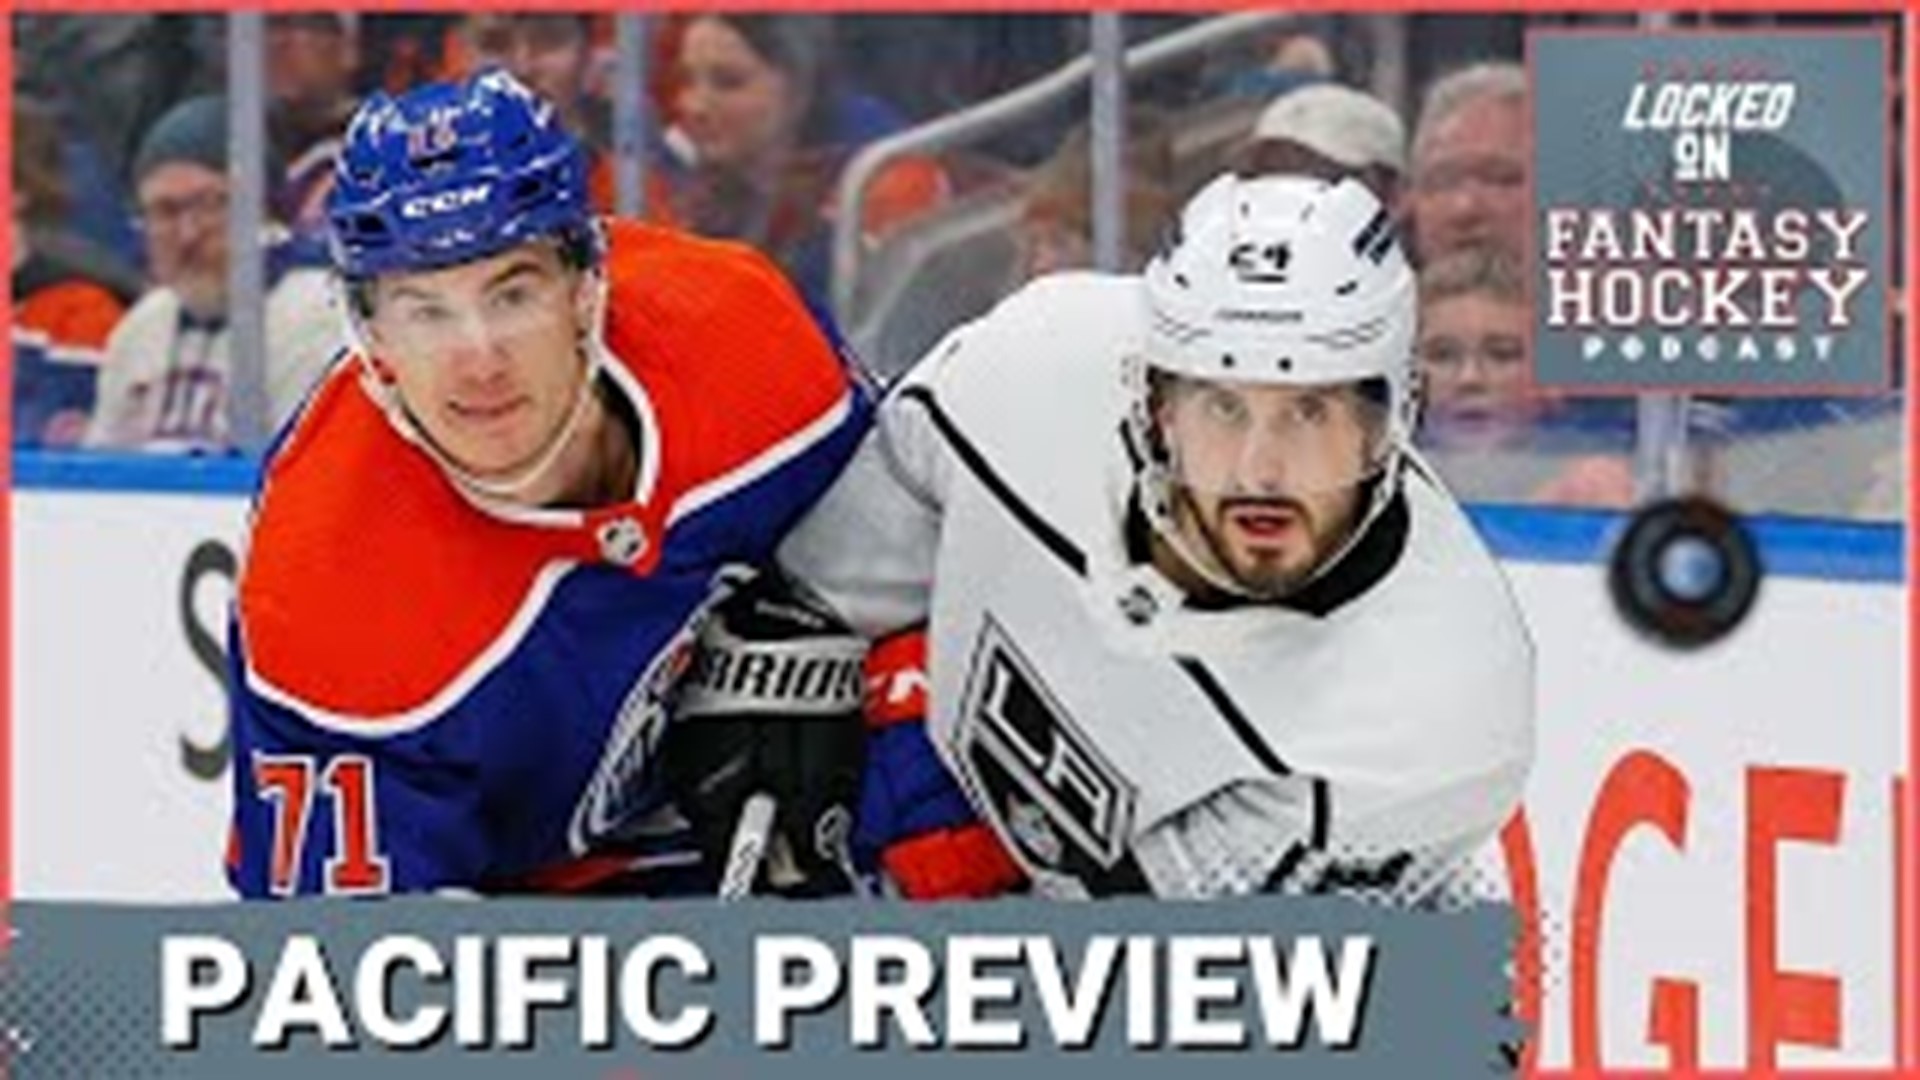 We arrive at the Pacific Division playoff preview on this fine Sunday of NHL postseason action with no shortage of juicy matchups to take in.